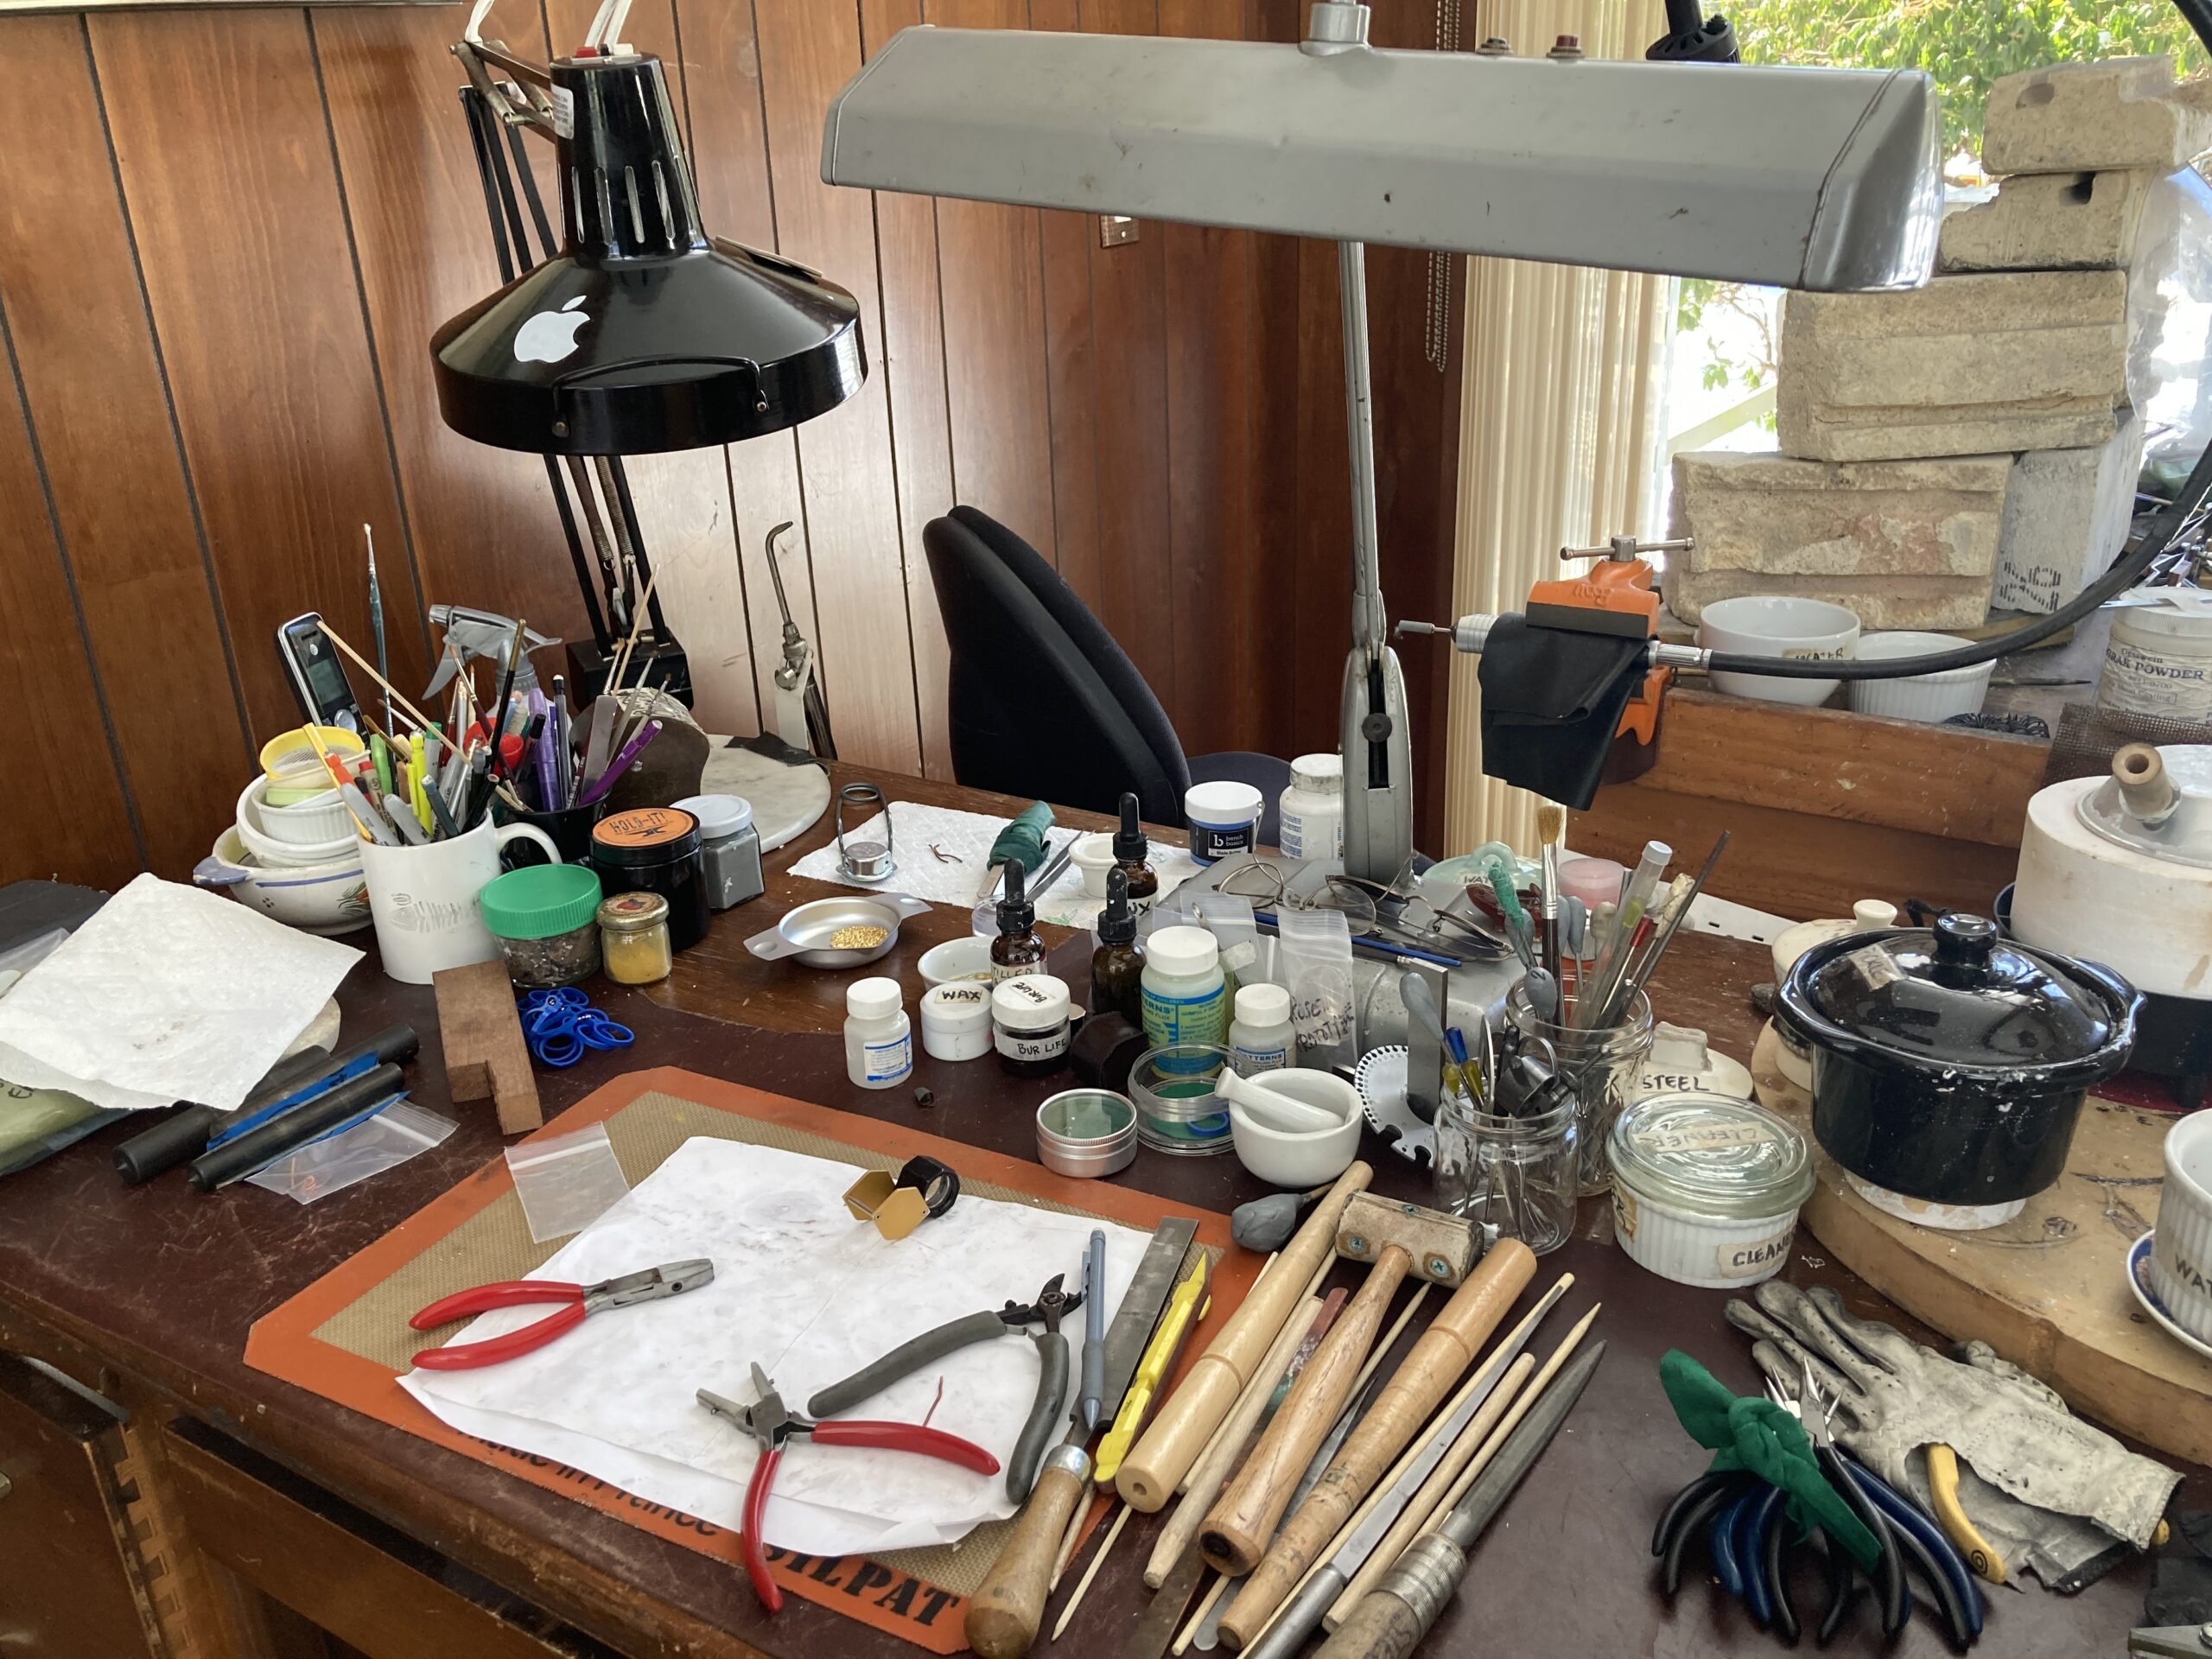 Lois Gore's jewelry making space.